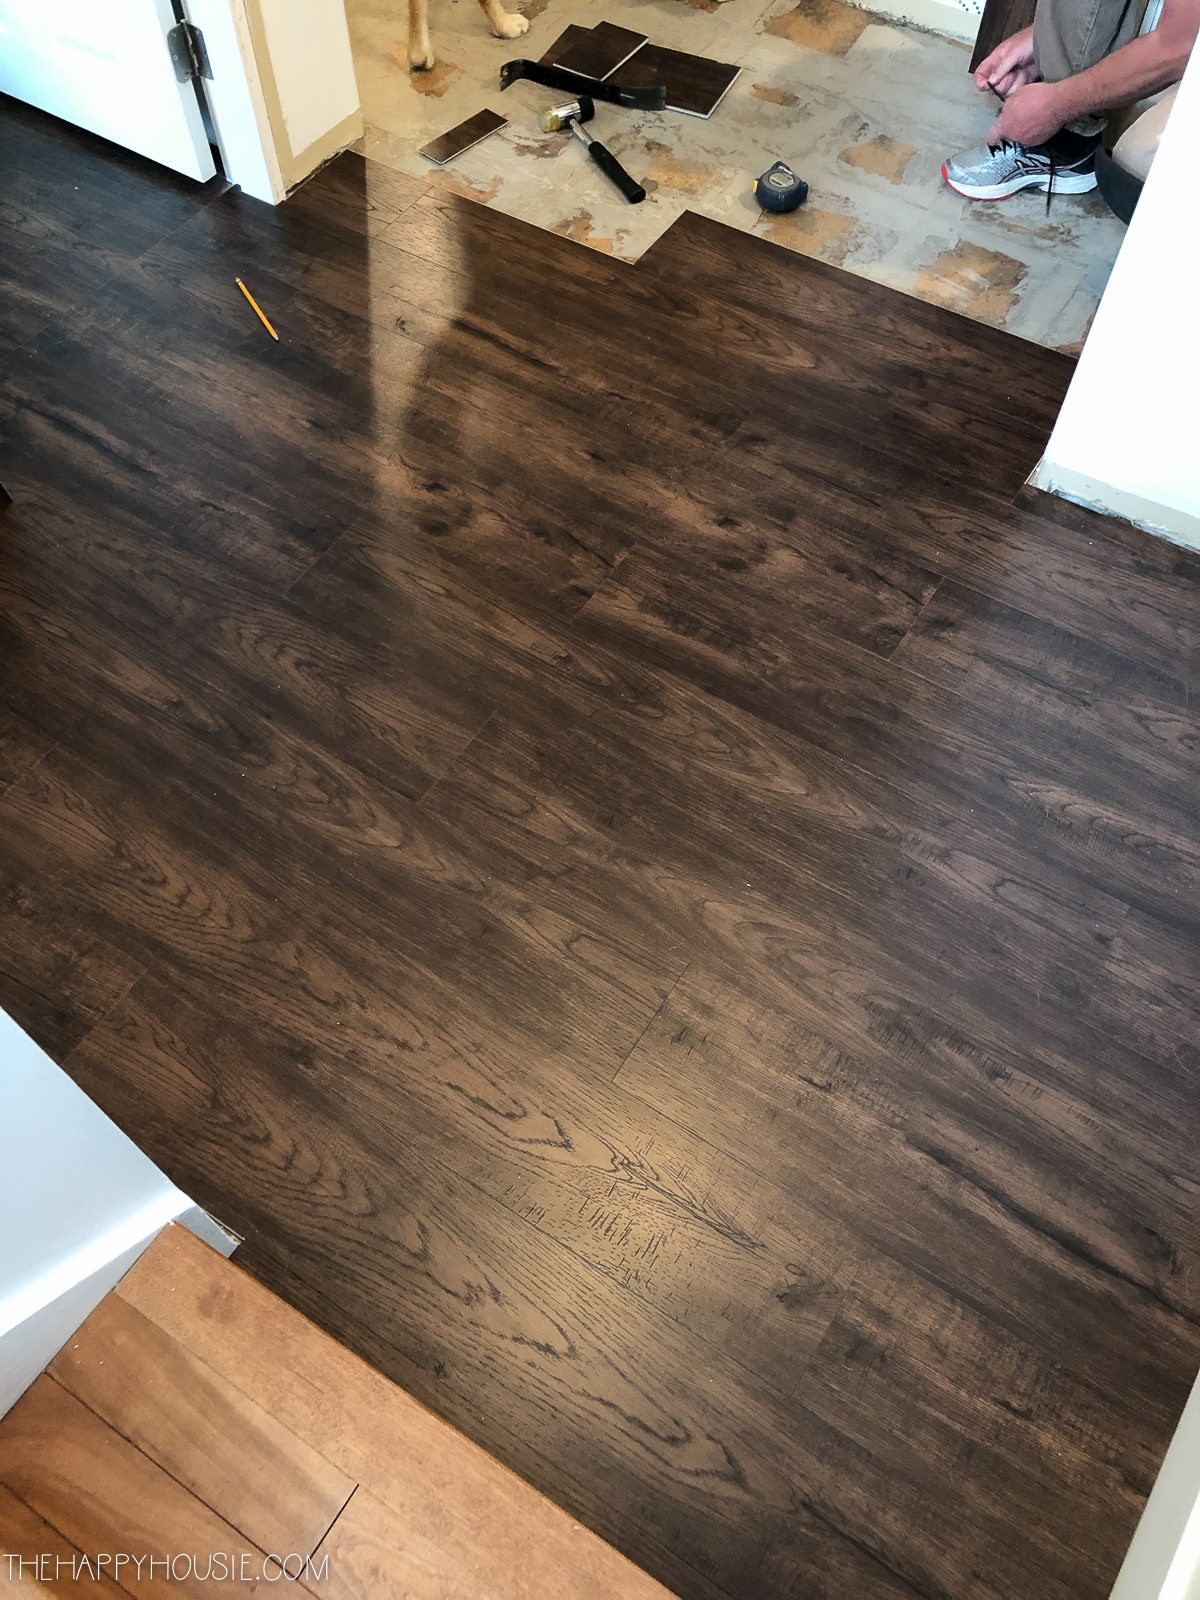 Install Vinyl Plank Over Tile Floors, Can You Lay Floating Floor Over Tiles